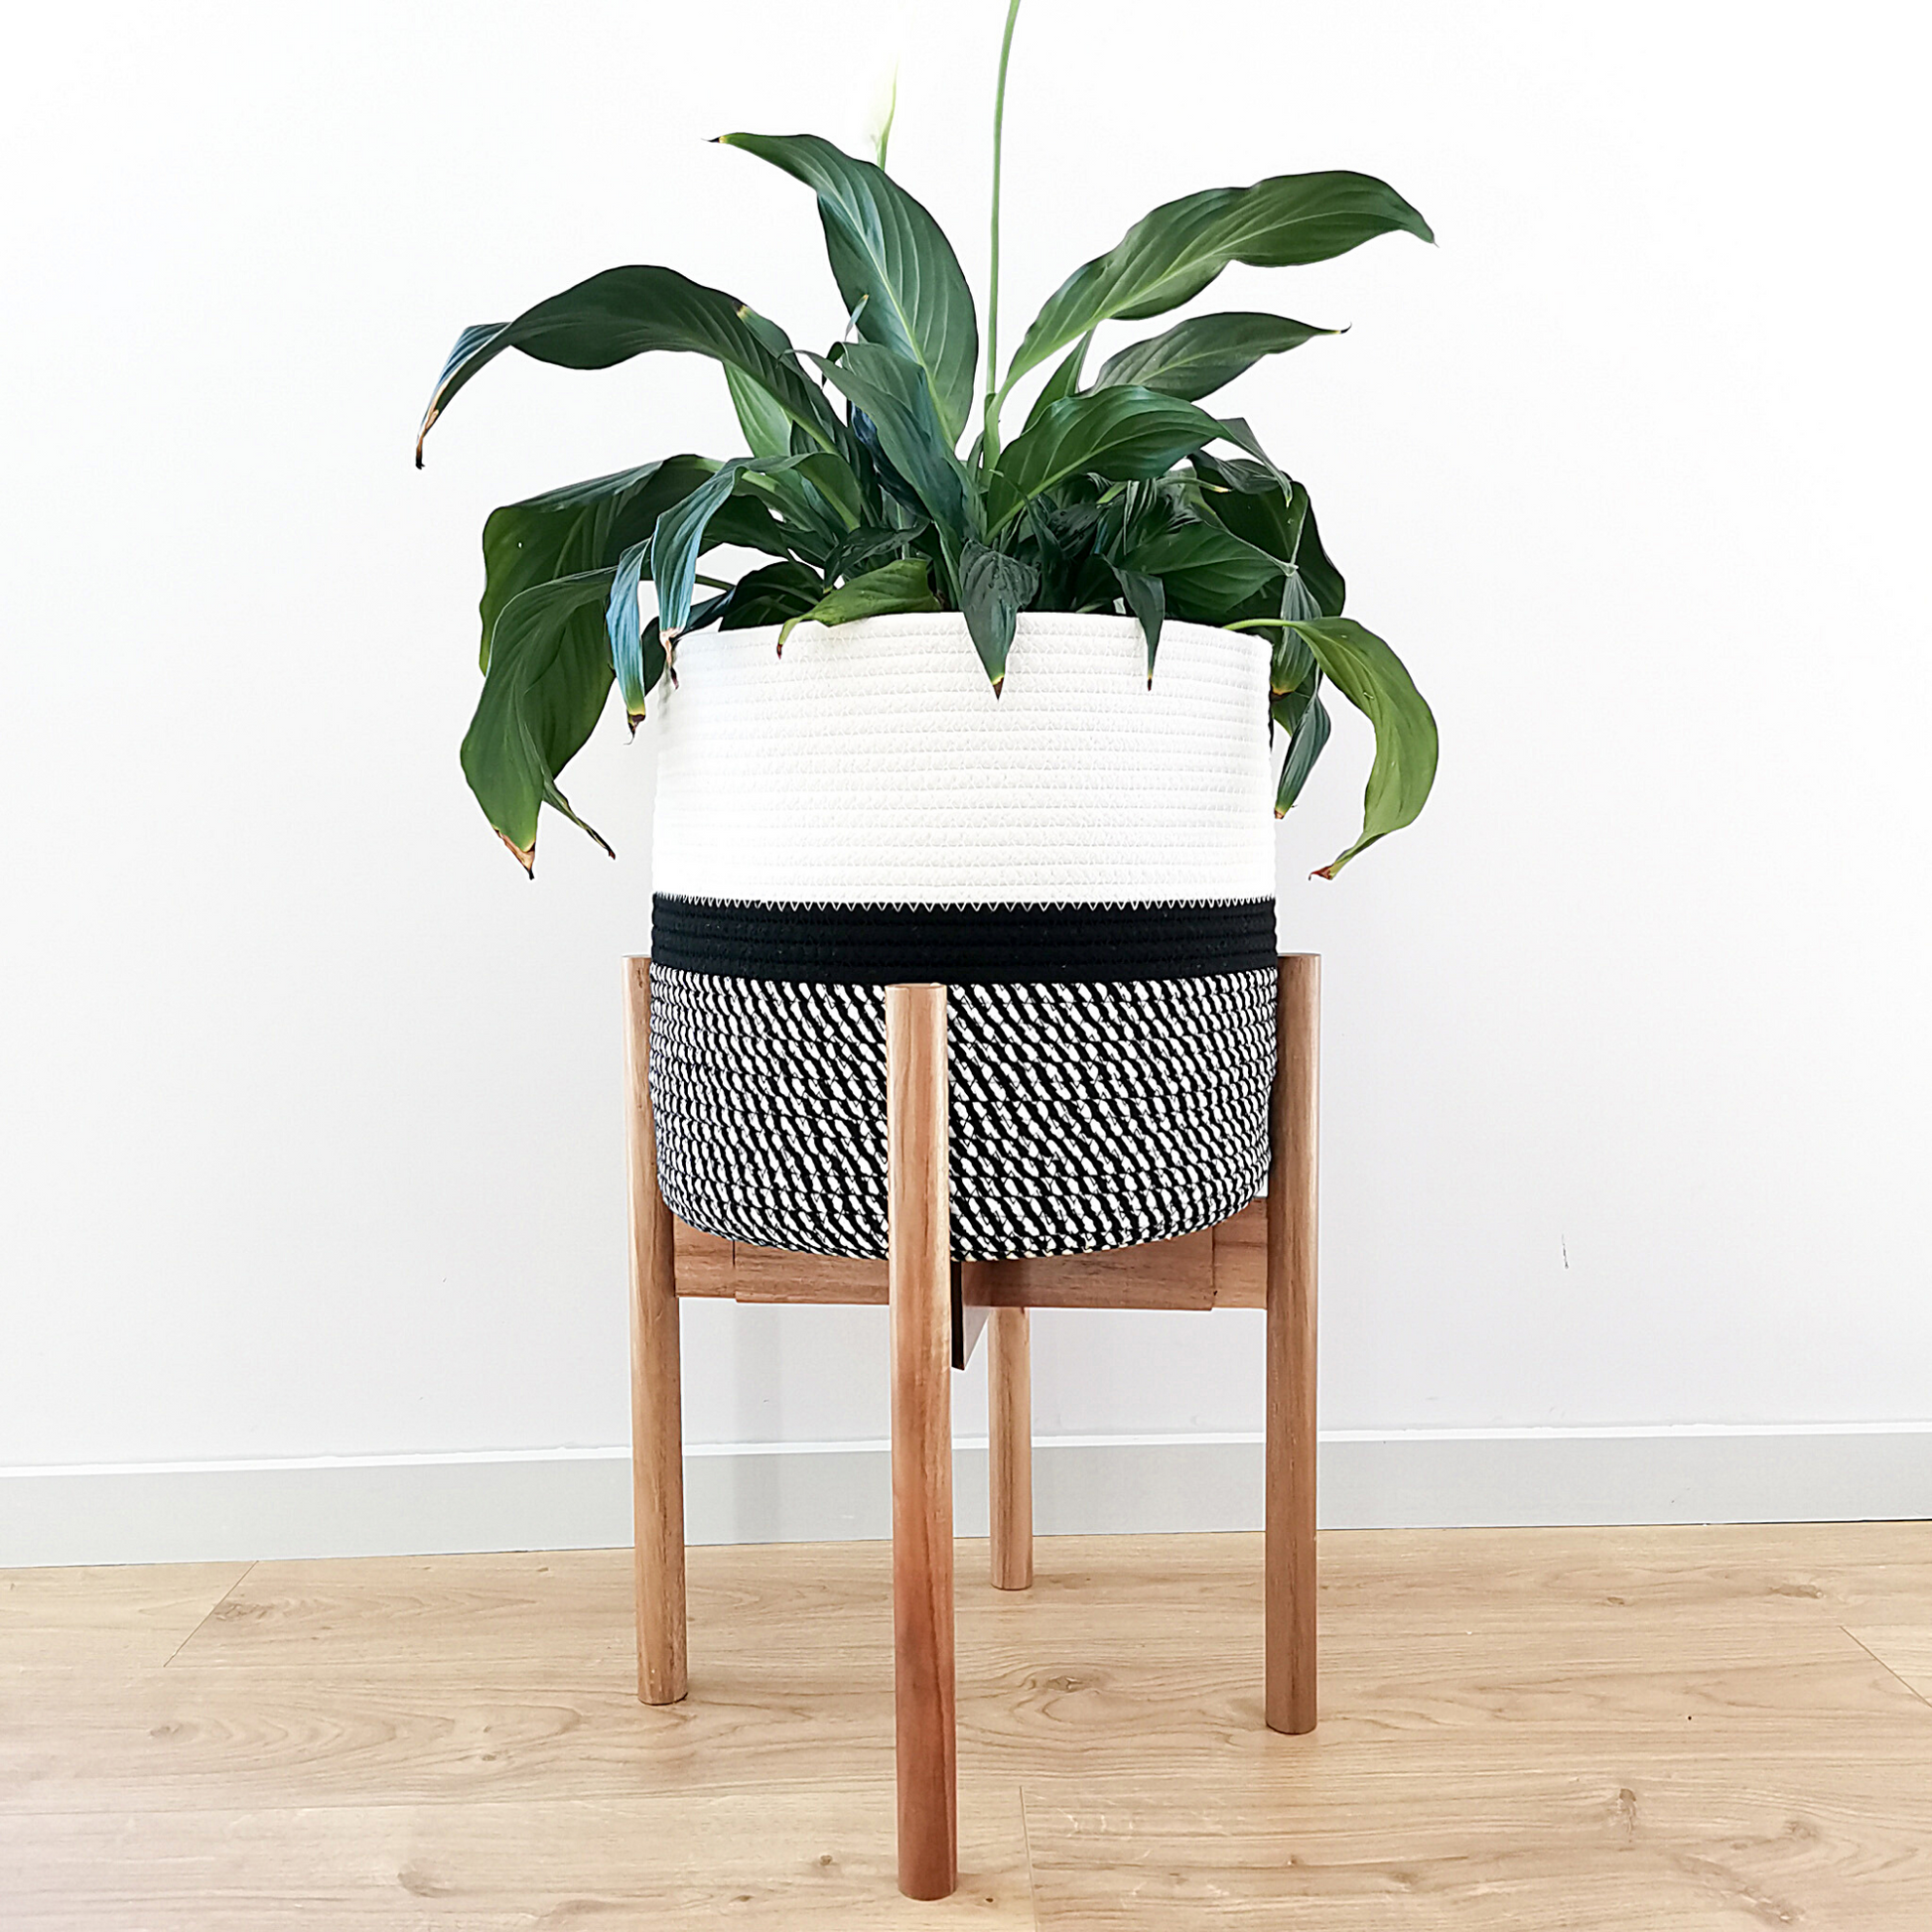 These plant holders are adjustable and handcrafted to fit plant pots between the sizes of 8-12” wide. Each planter stand can also be adjusted and flipped upside down so you can choose between different heights.